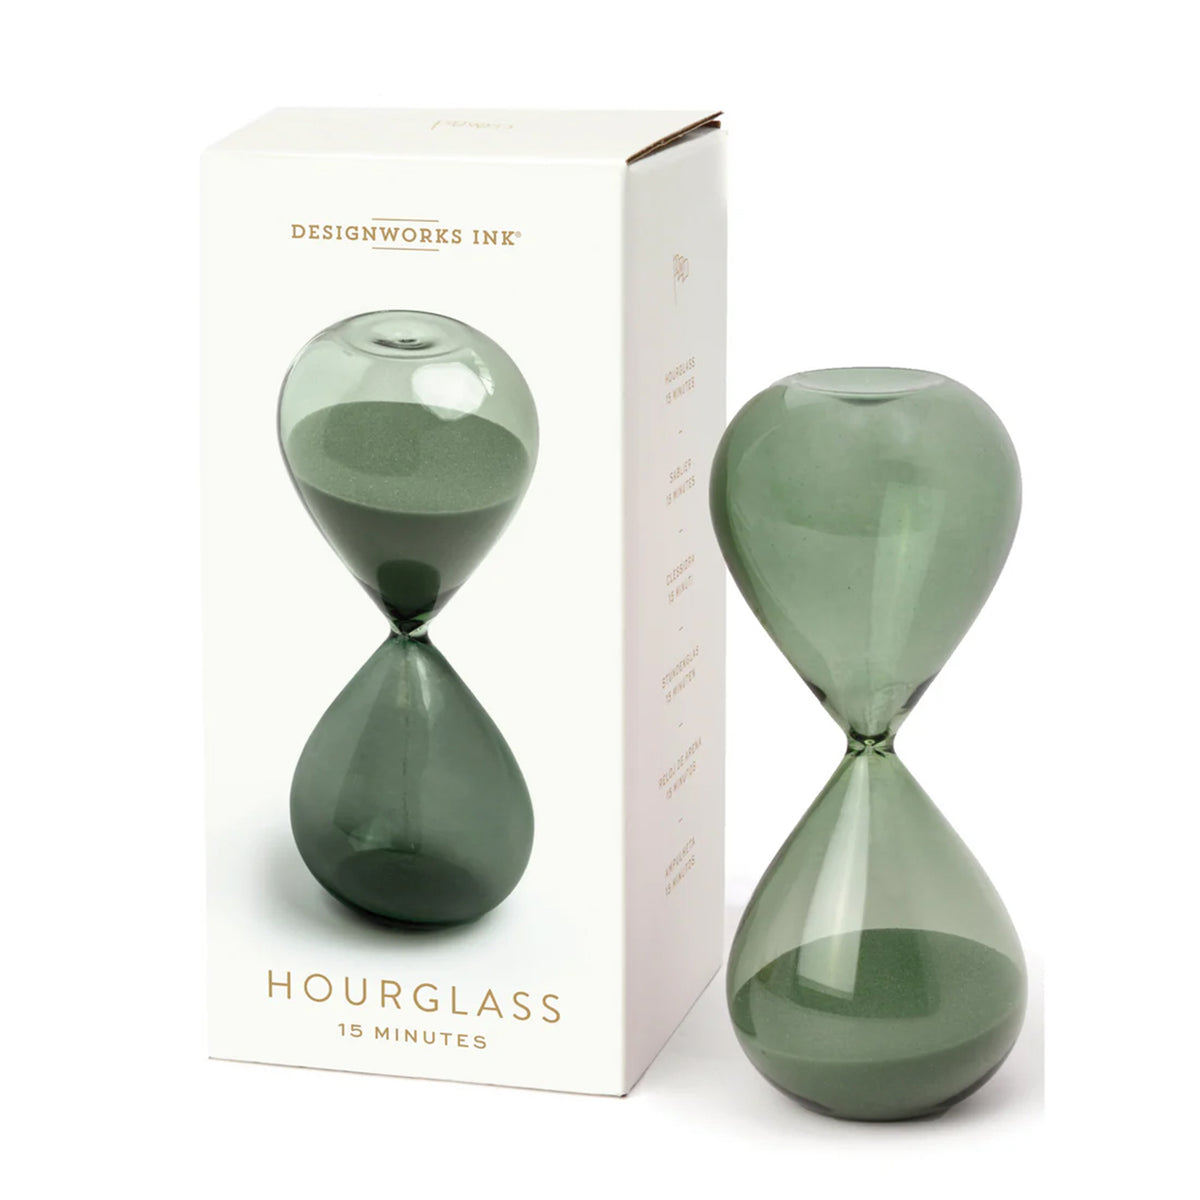 Evergreen Hourglass (15 minutes) and printed box